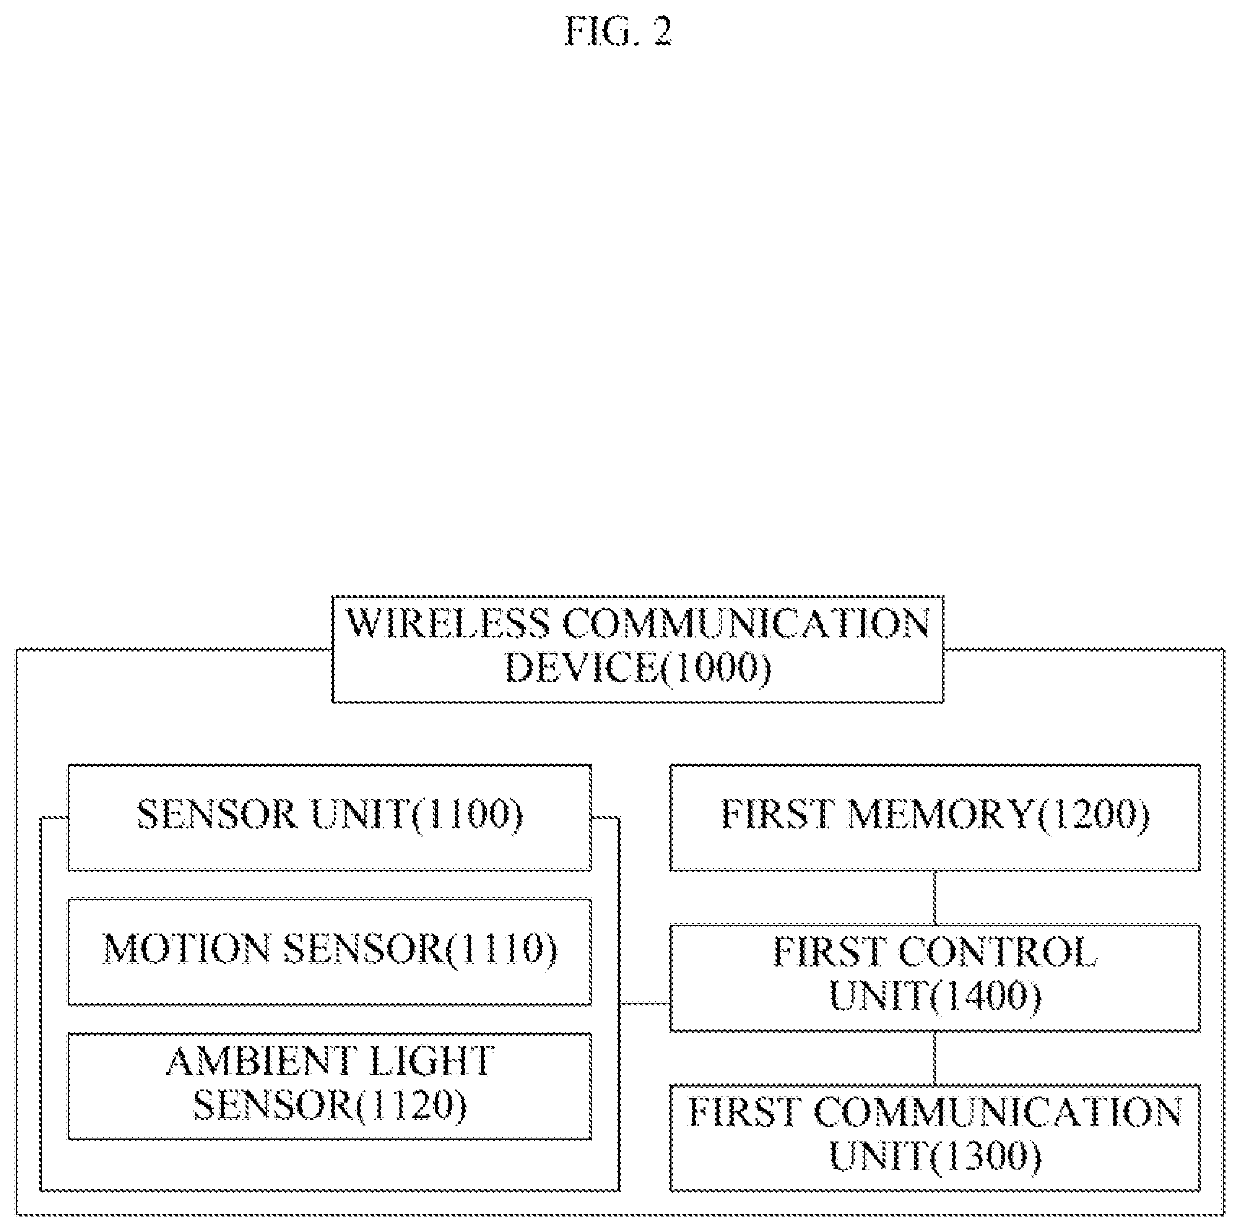 Wearable device for medication adherence monitoring